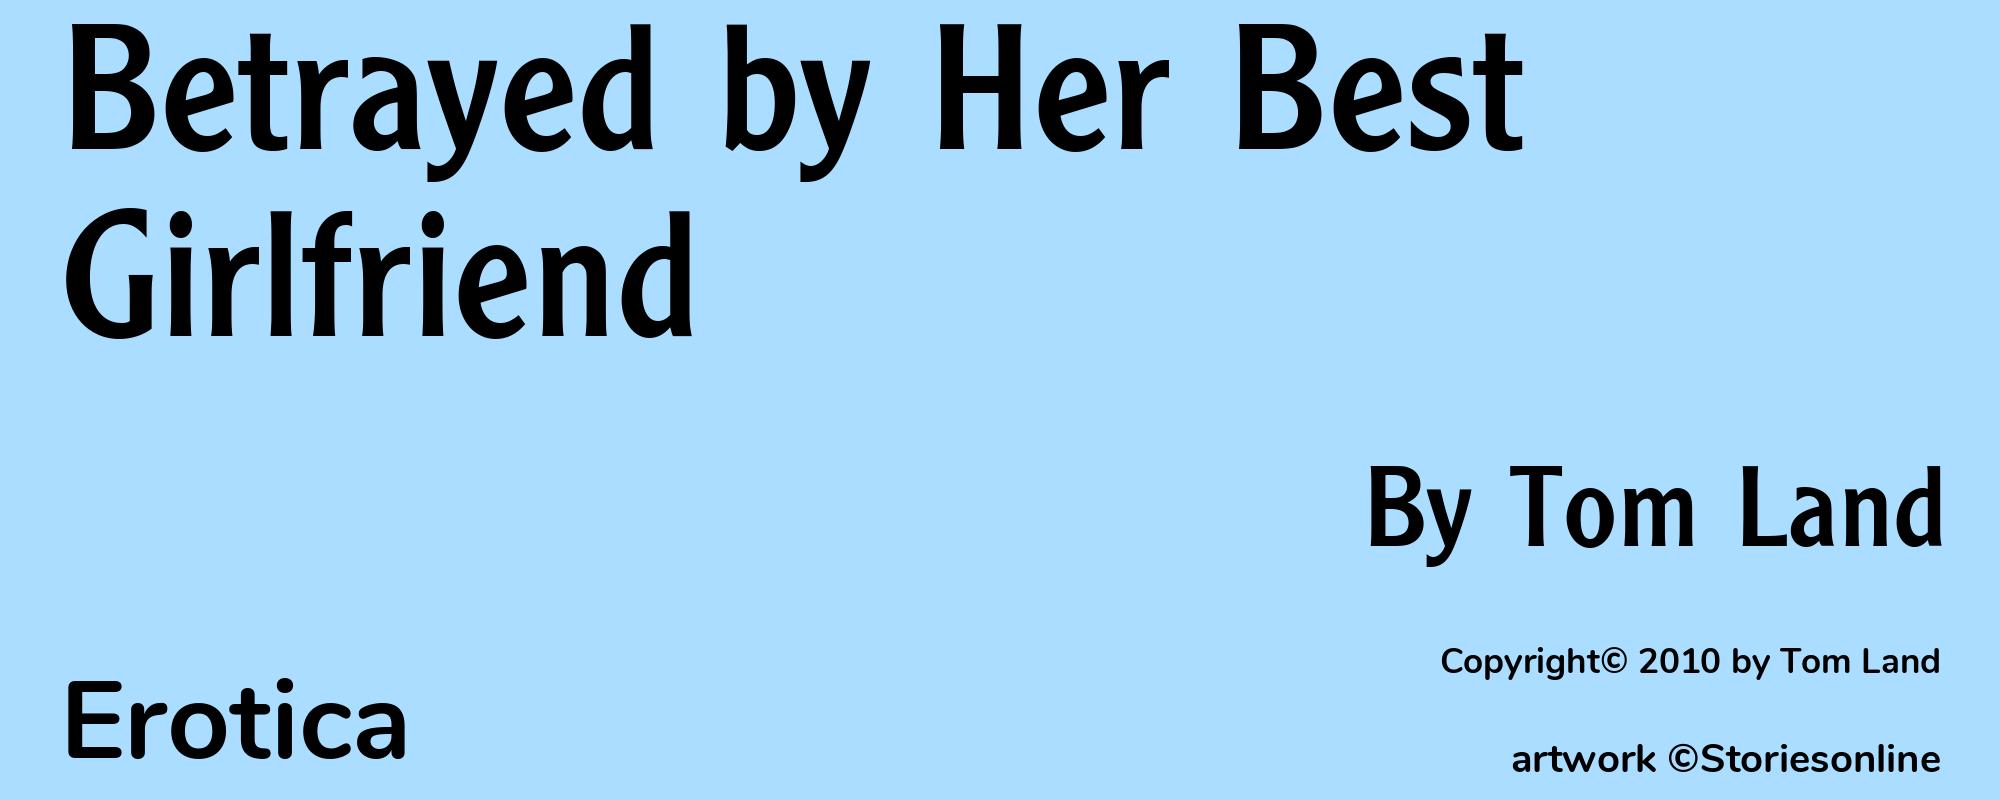 Betrayed by Her Best Girlfriend - Cover